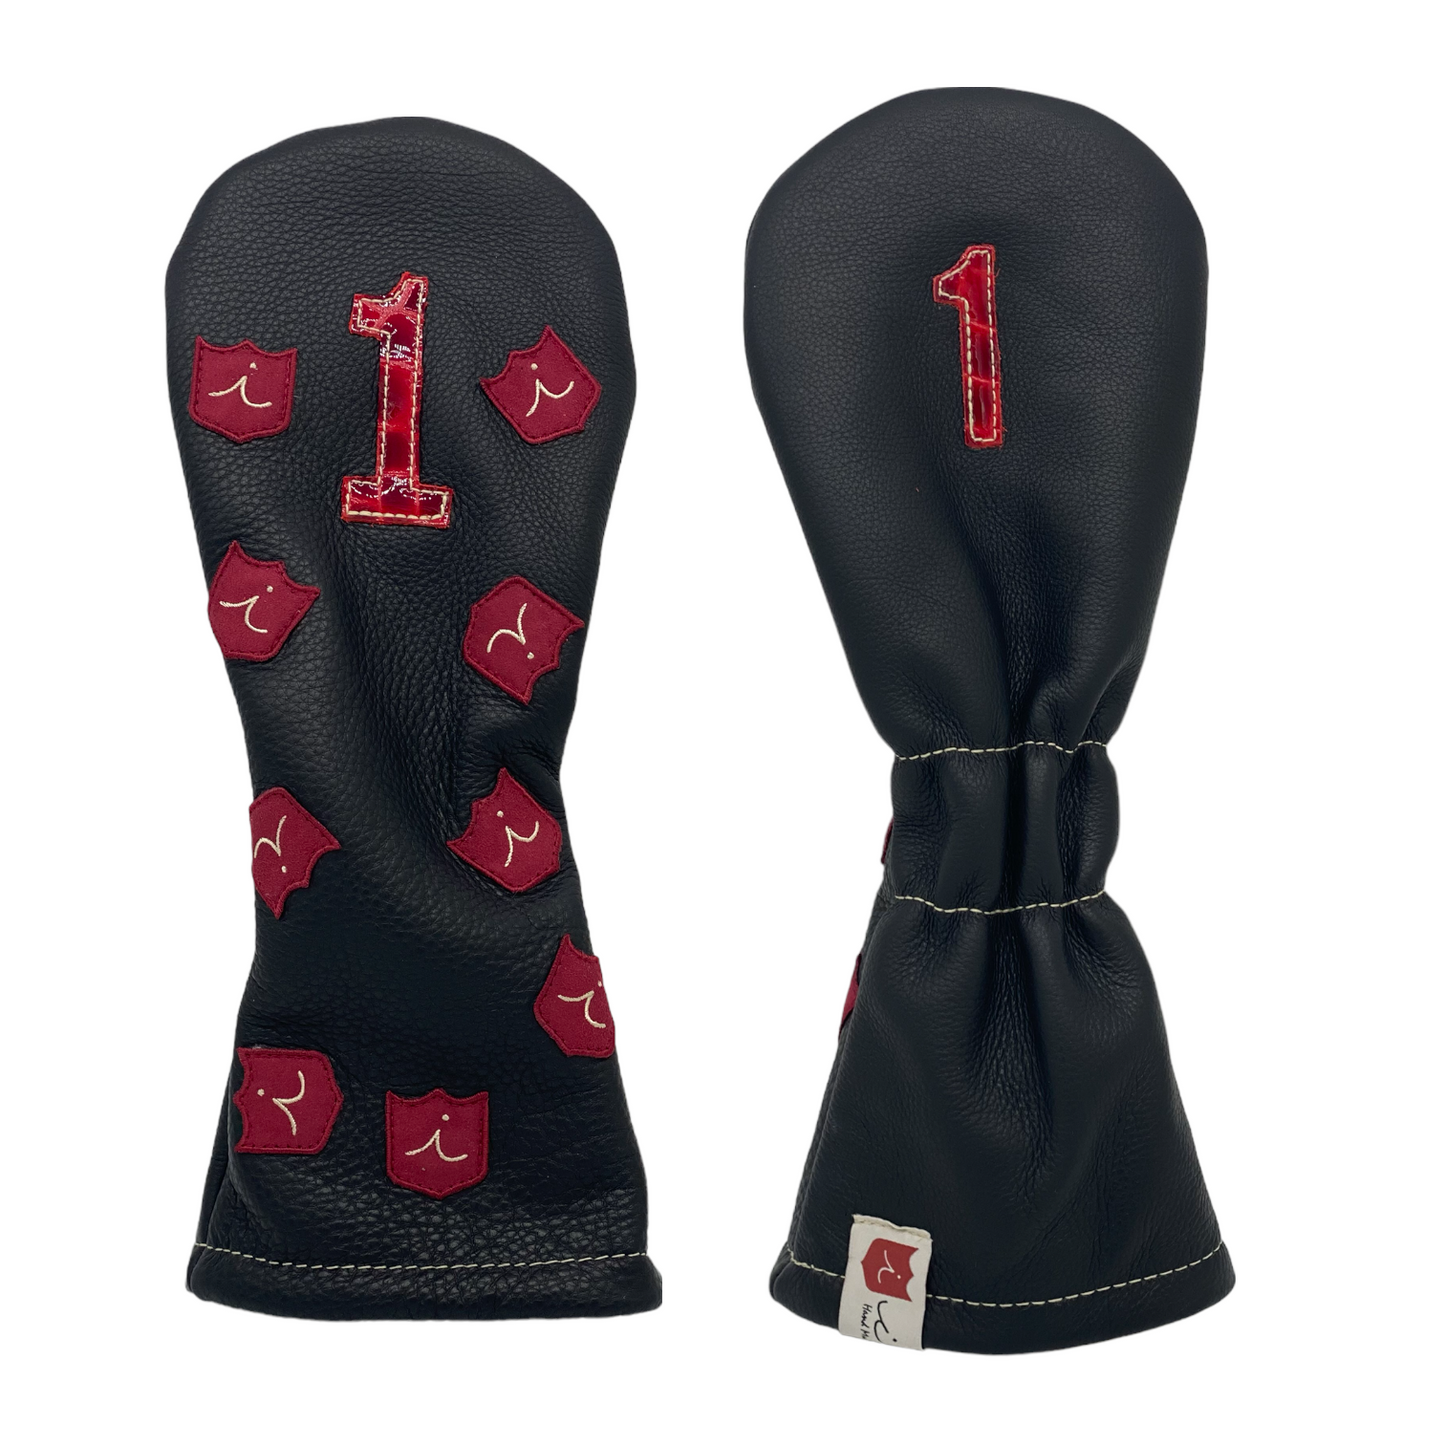 Dancing Crest Headcover: Pitch Black + Red Patent Croc